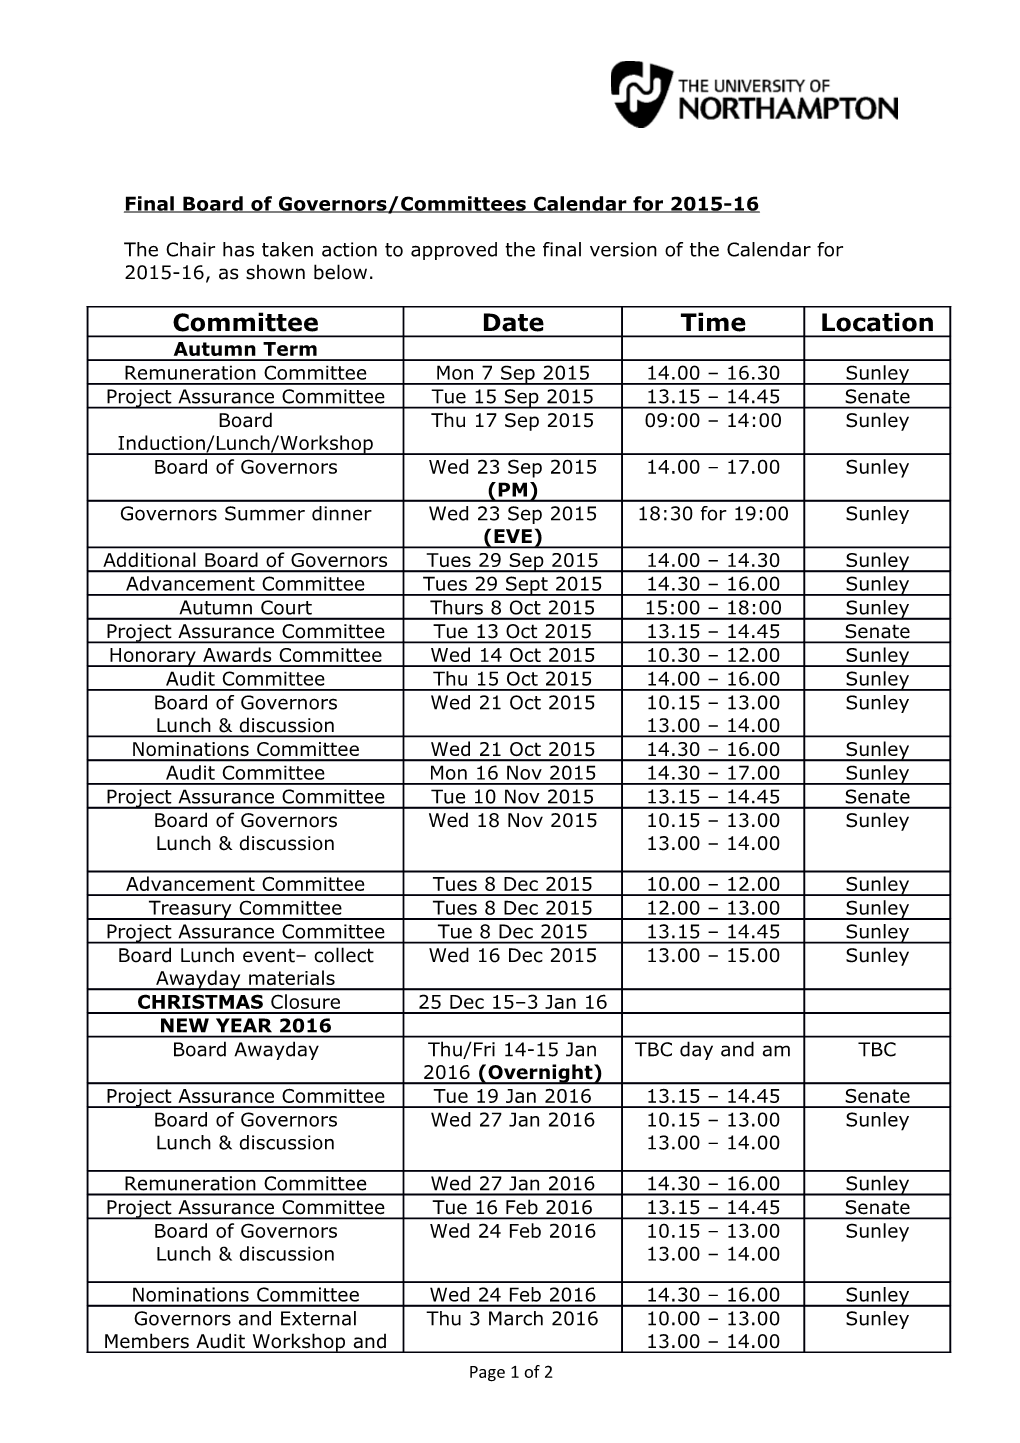 Board of Governors Public Schedule and Dates 2015-16